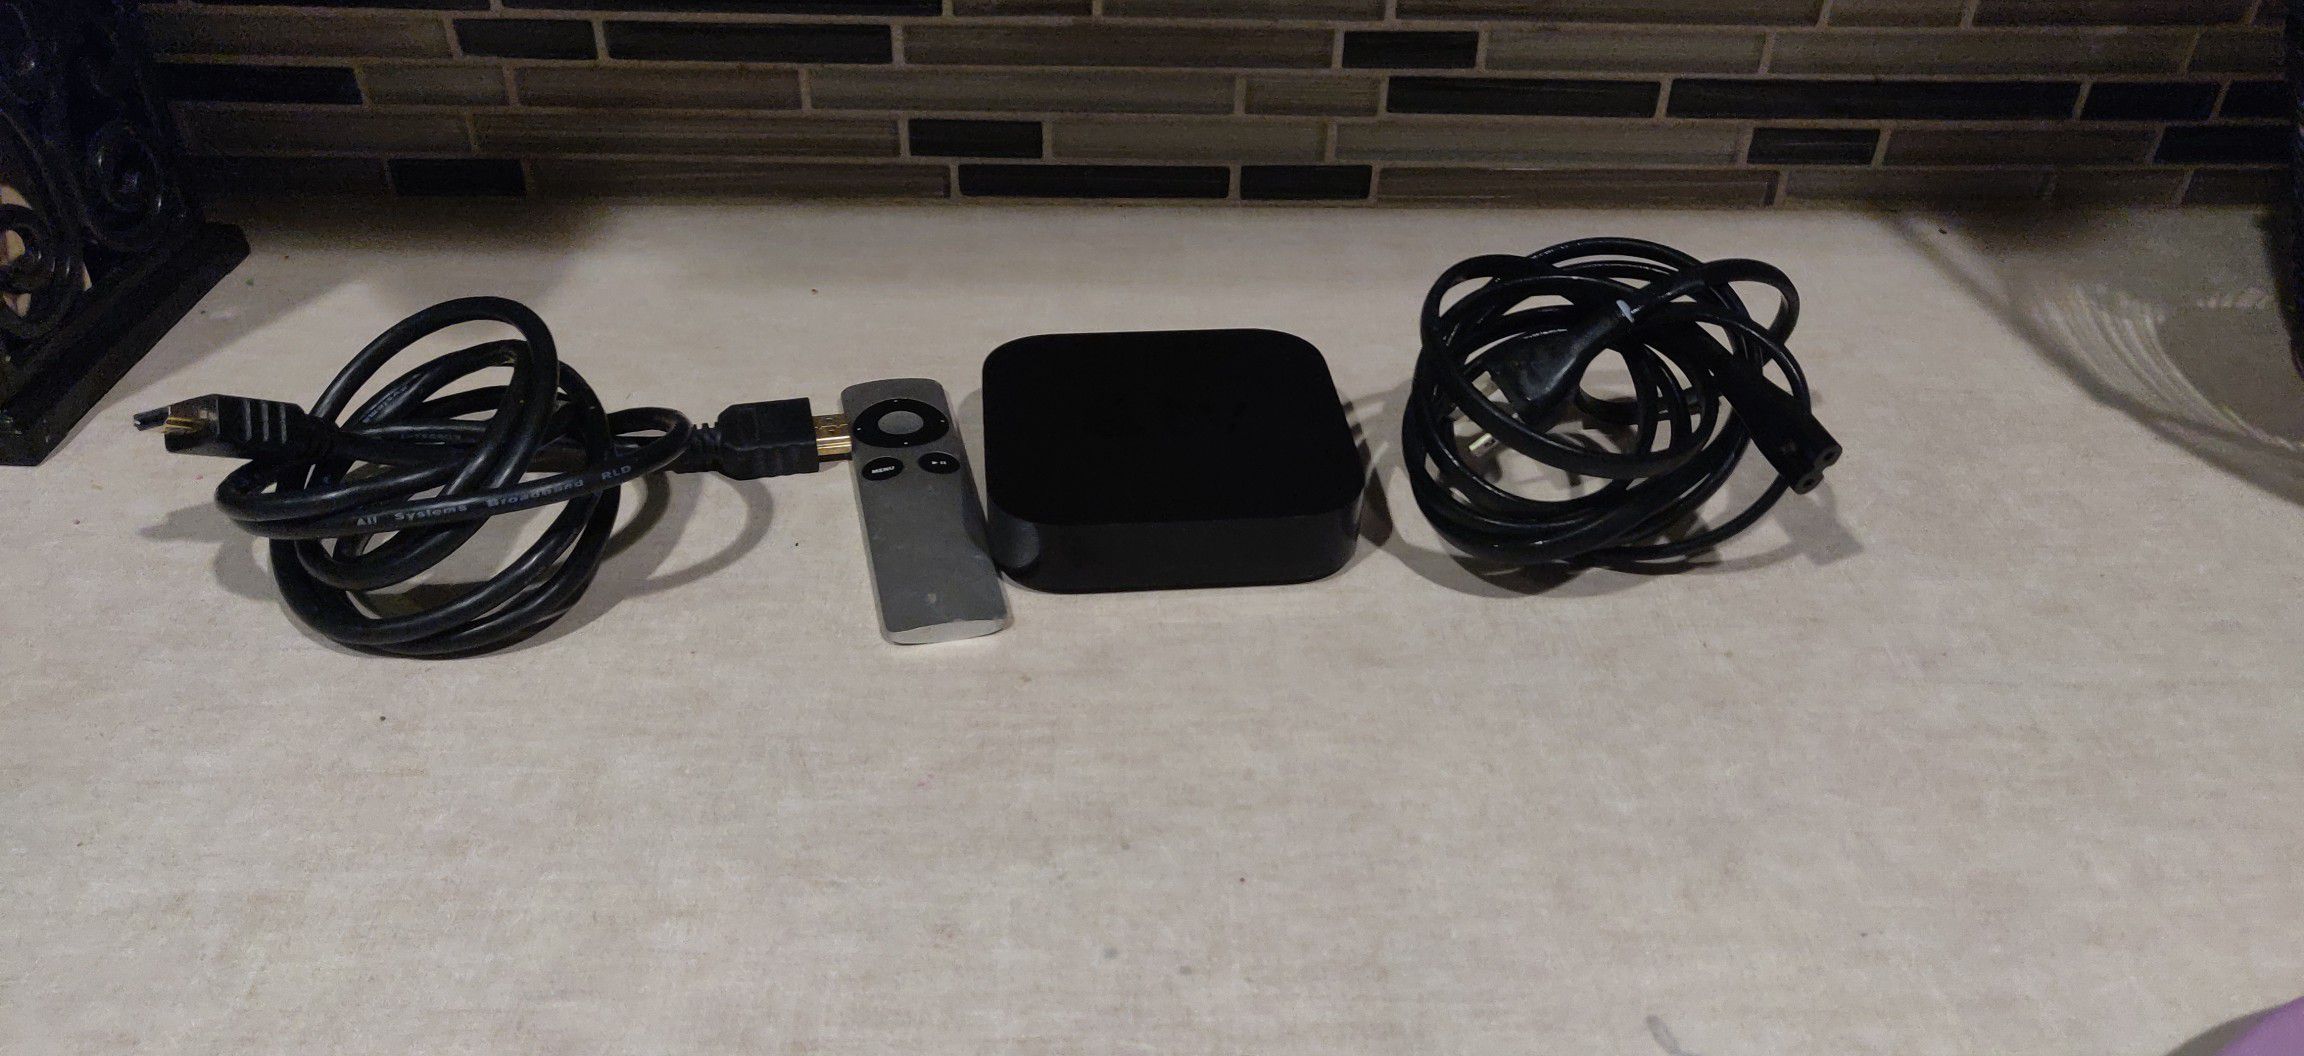 Apple TV Generation 2 with HDMI cable